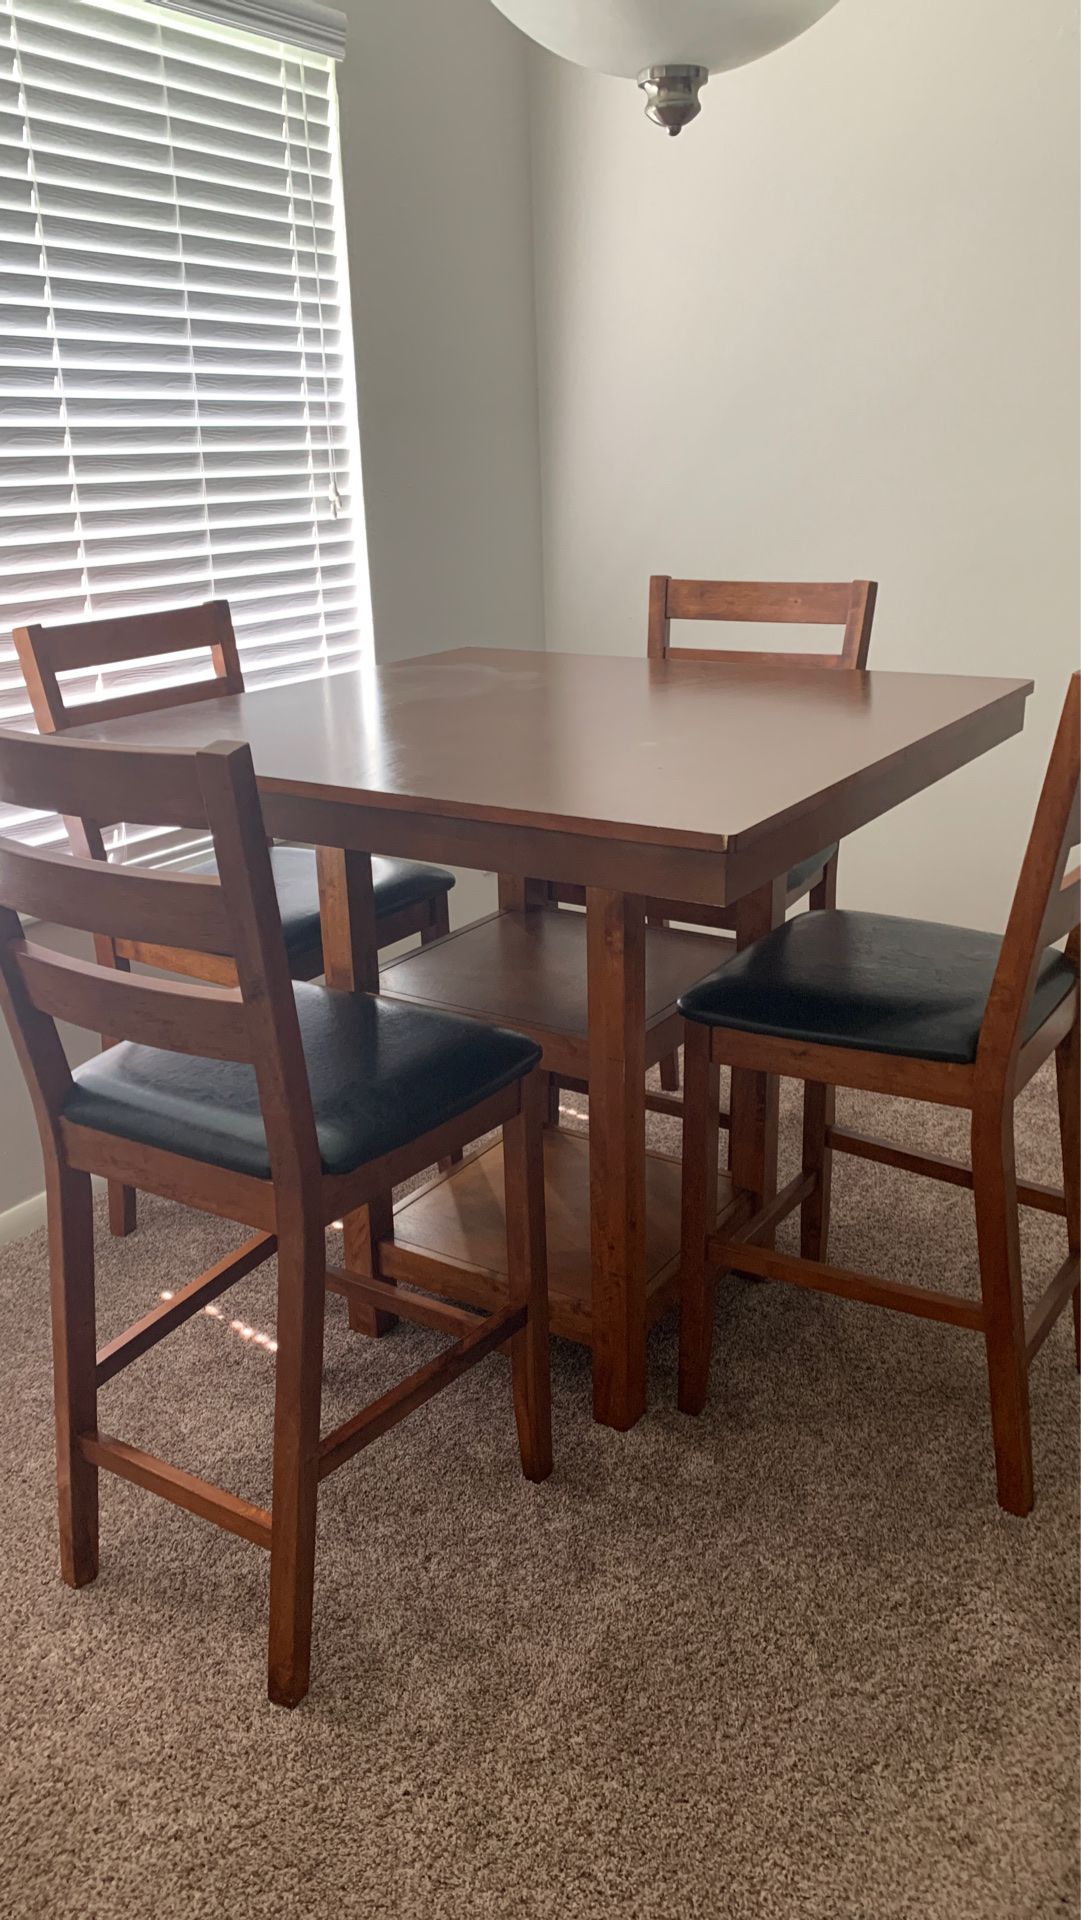 High bistro table w/4 chairs